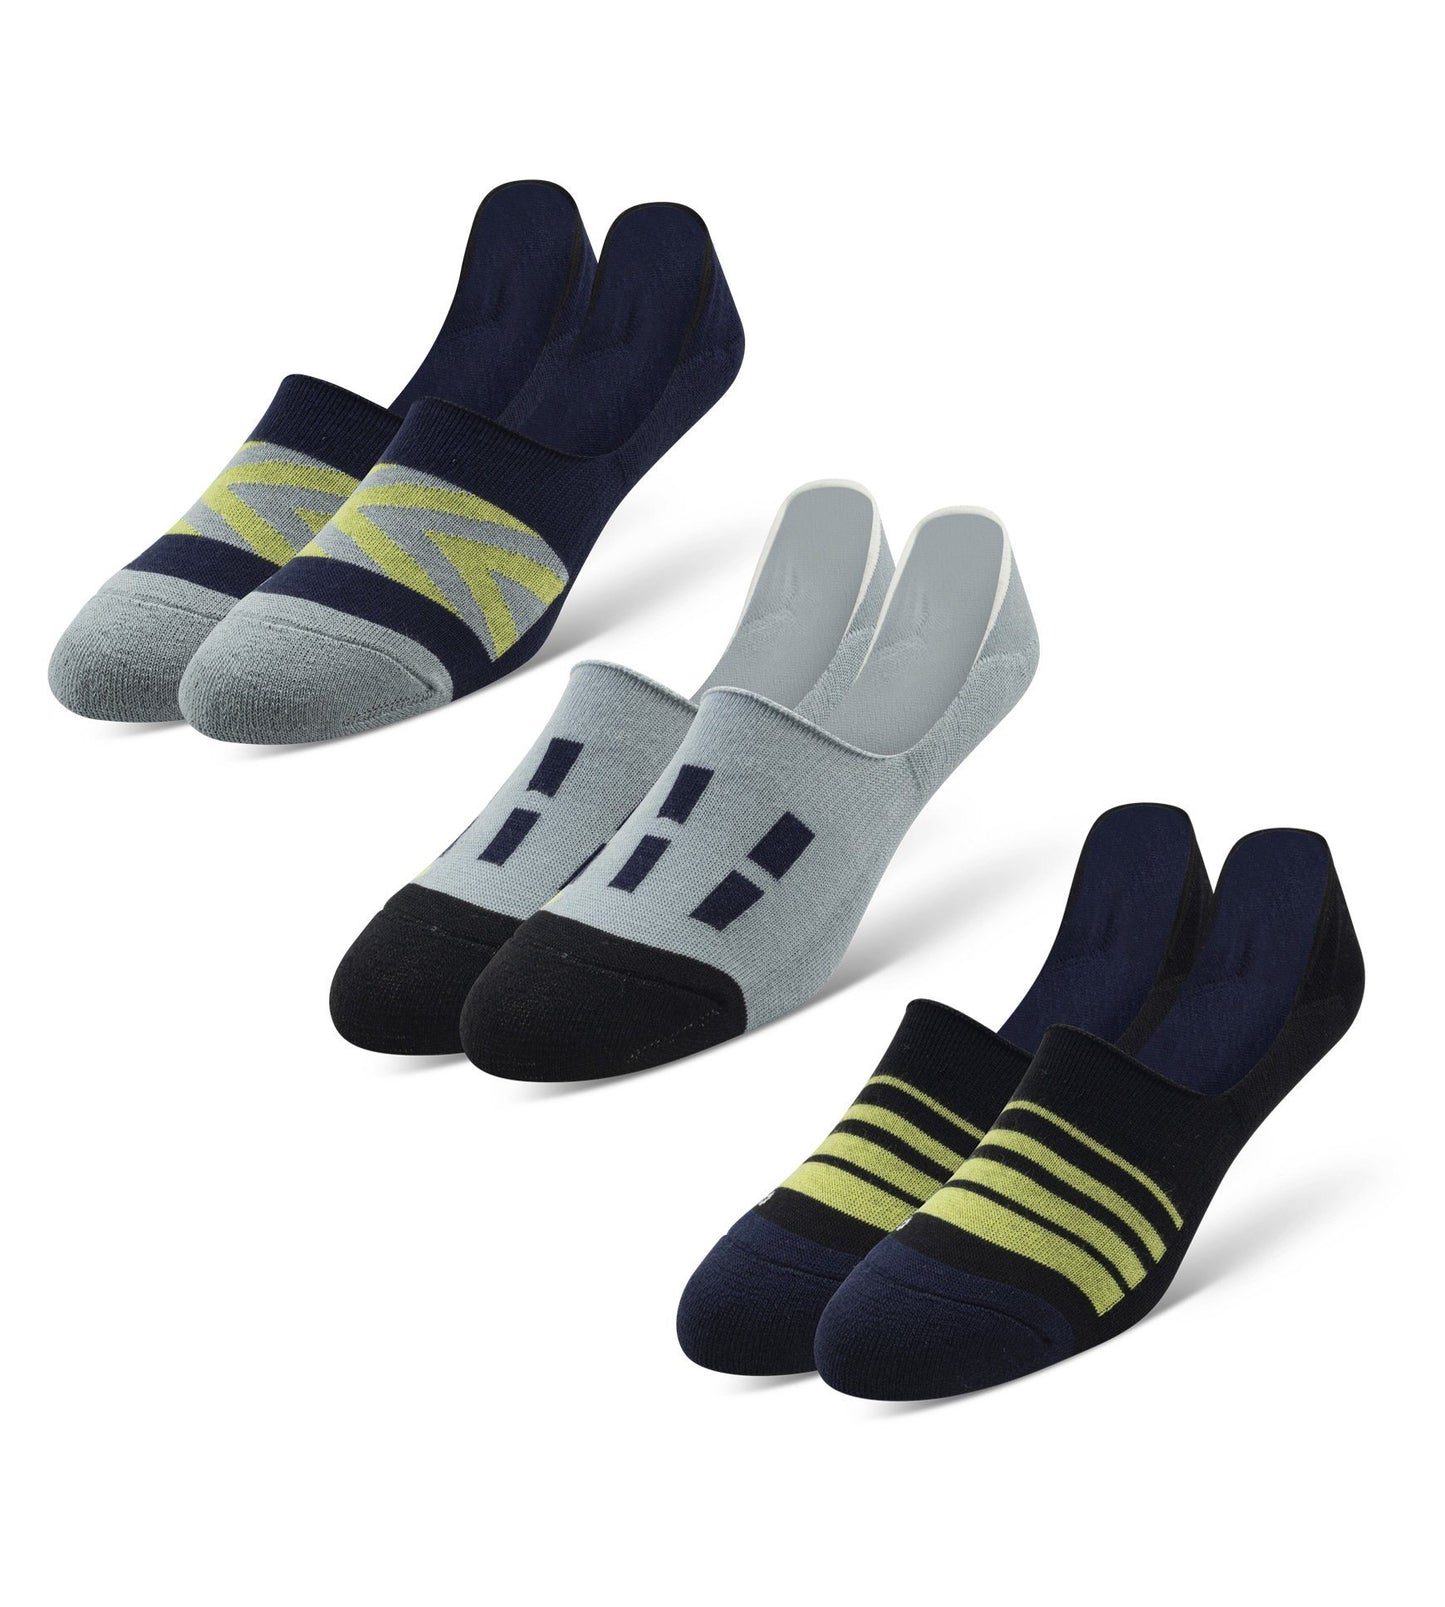 Cushion No Show Socks 3 Pack in navy, light blue and green